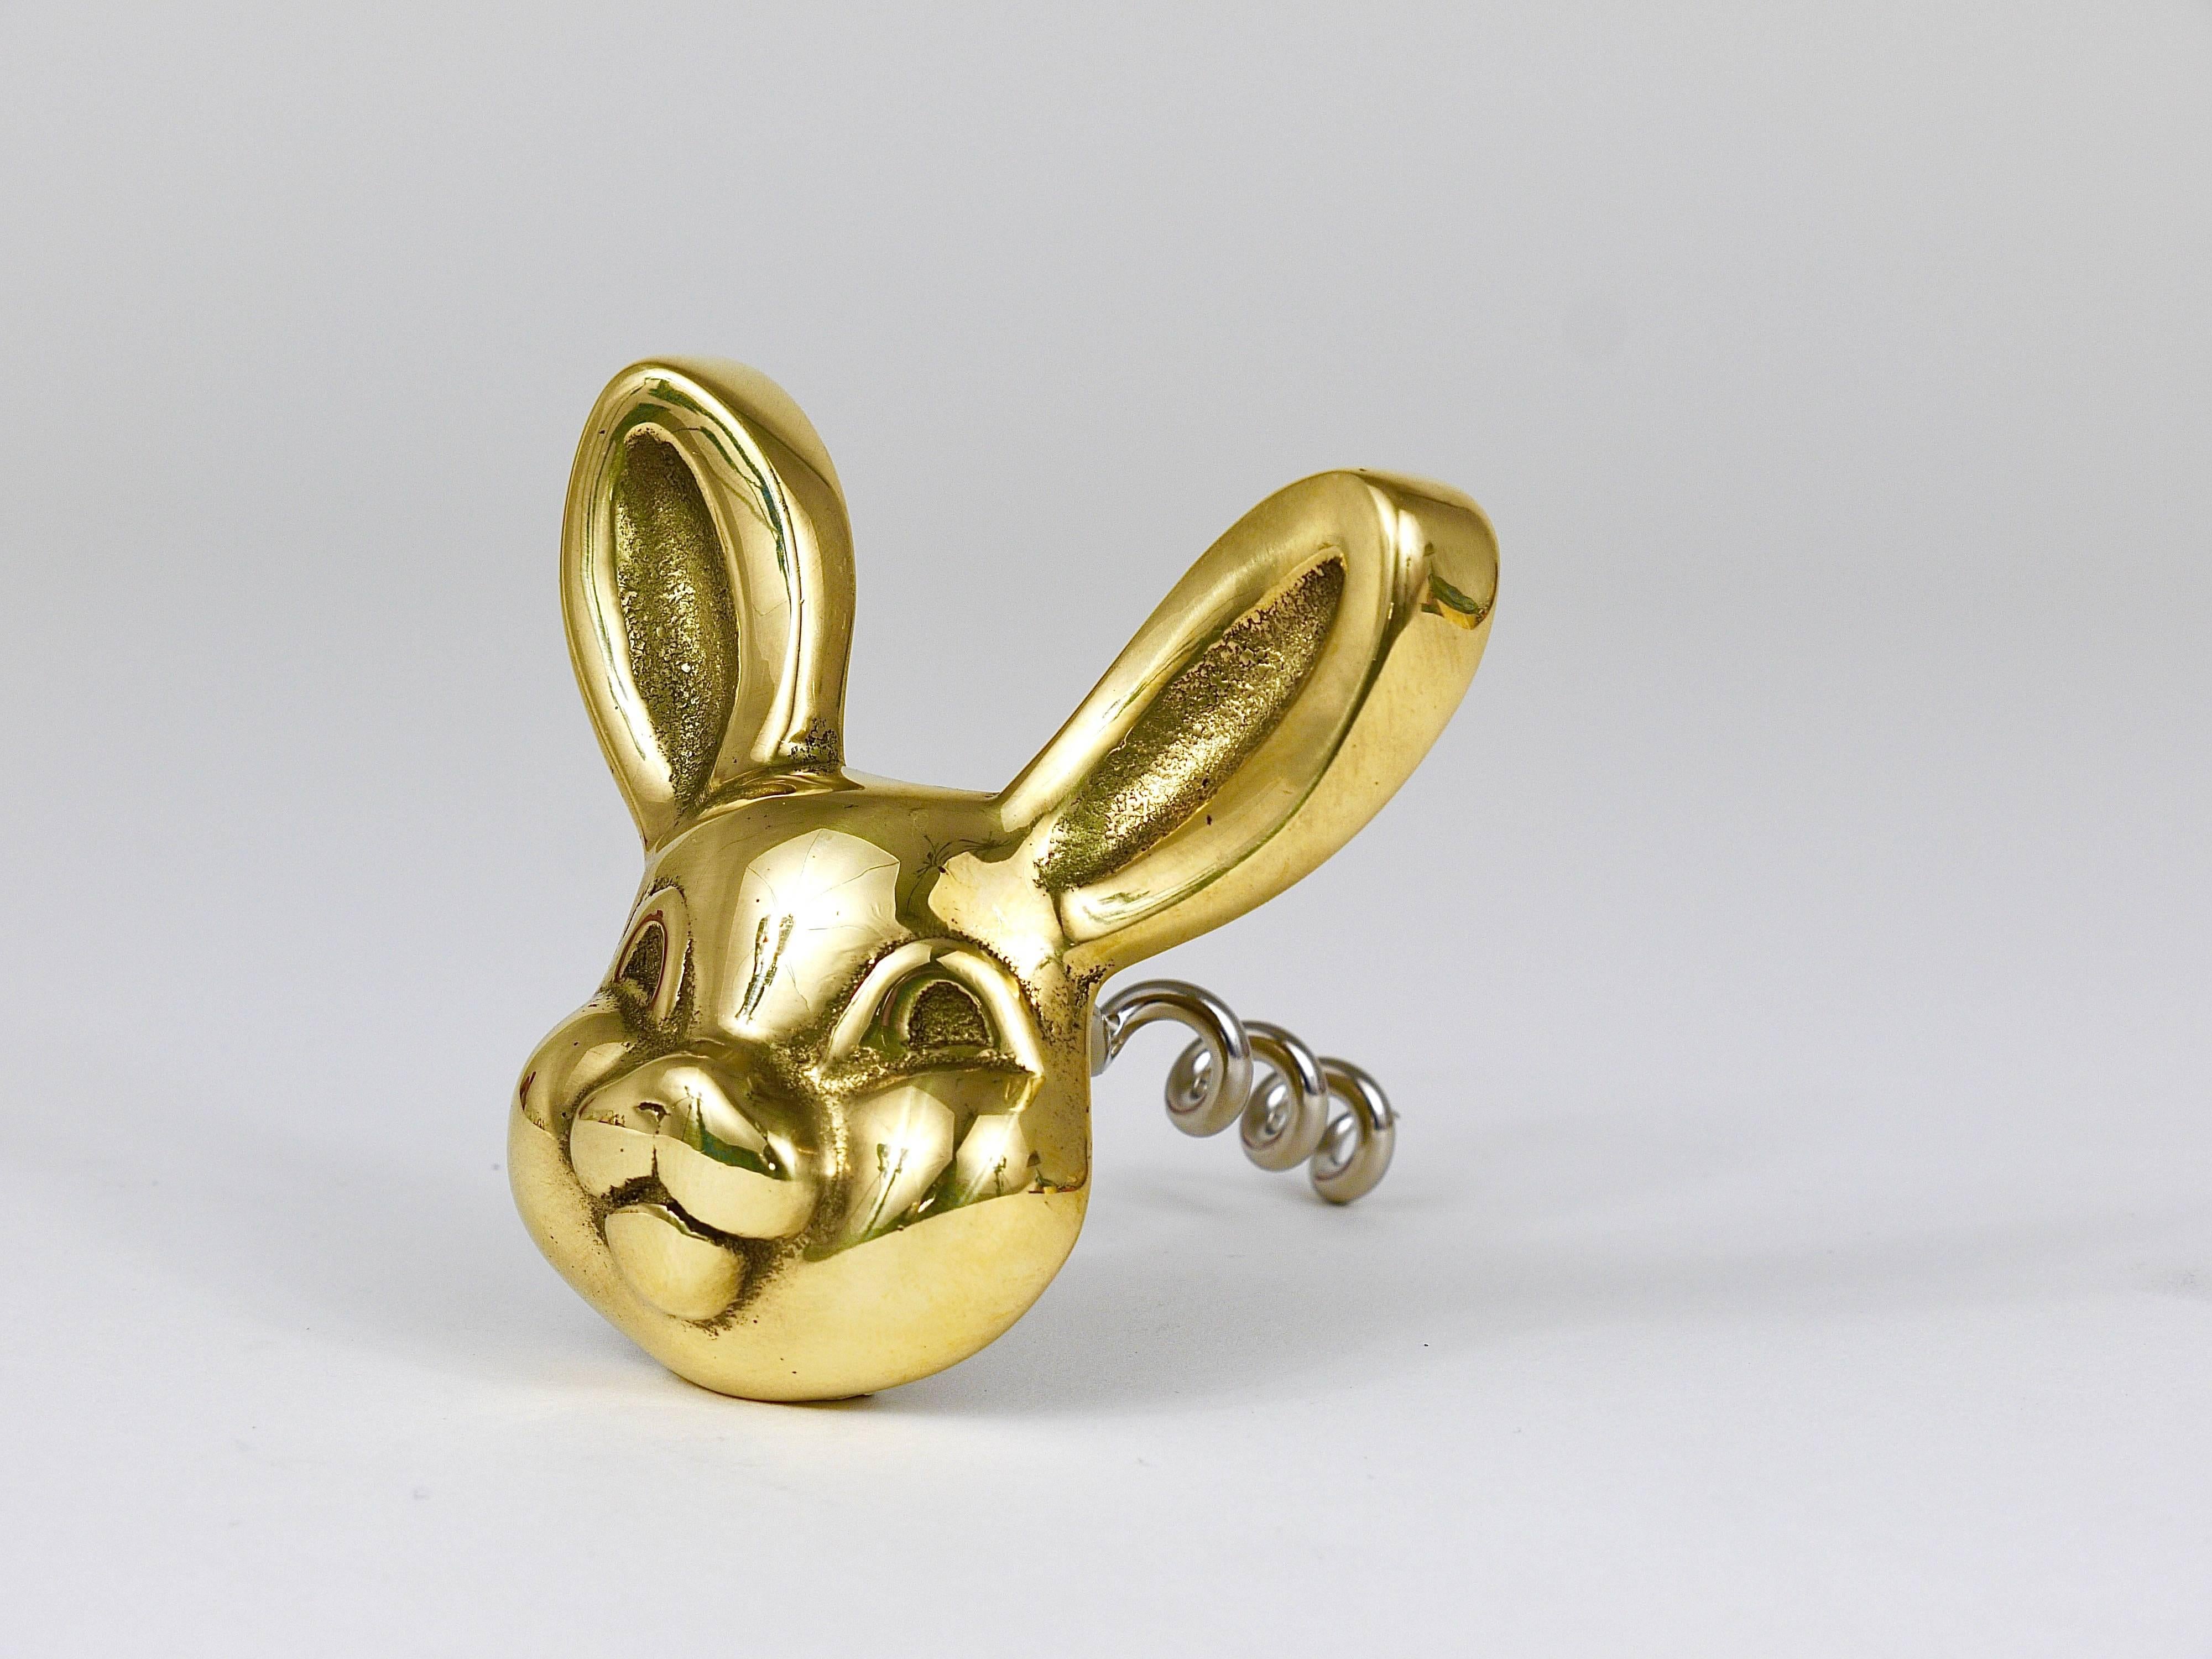 A charming Mid-Century bottle opener / cork screw, displaying a rabbit. A very humorous design by Walter Bosse, executed by Hertha Baller Austria in the 1950s. Made of polished brass, in very good condition.